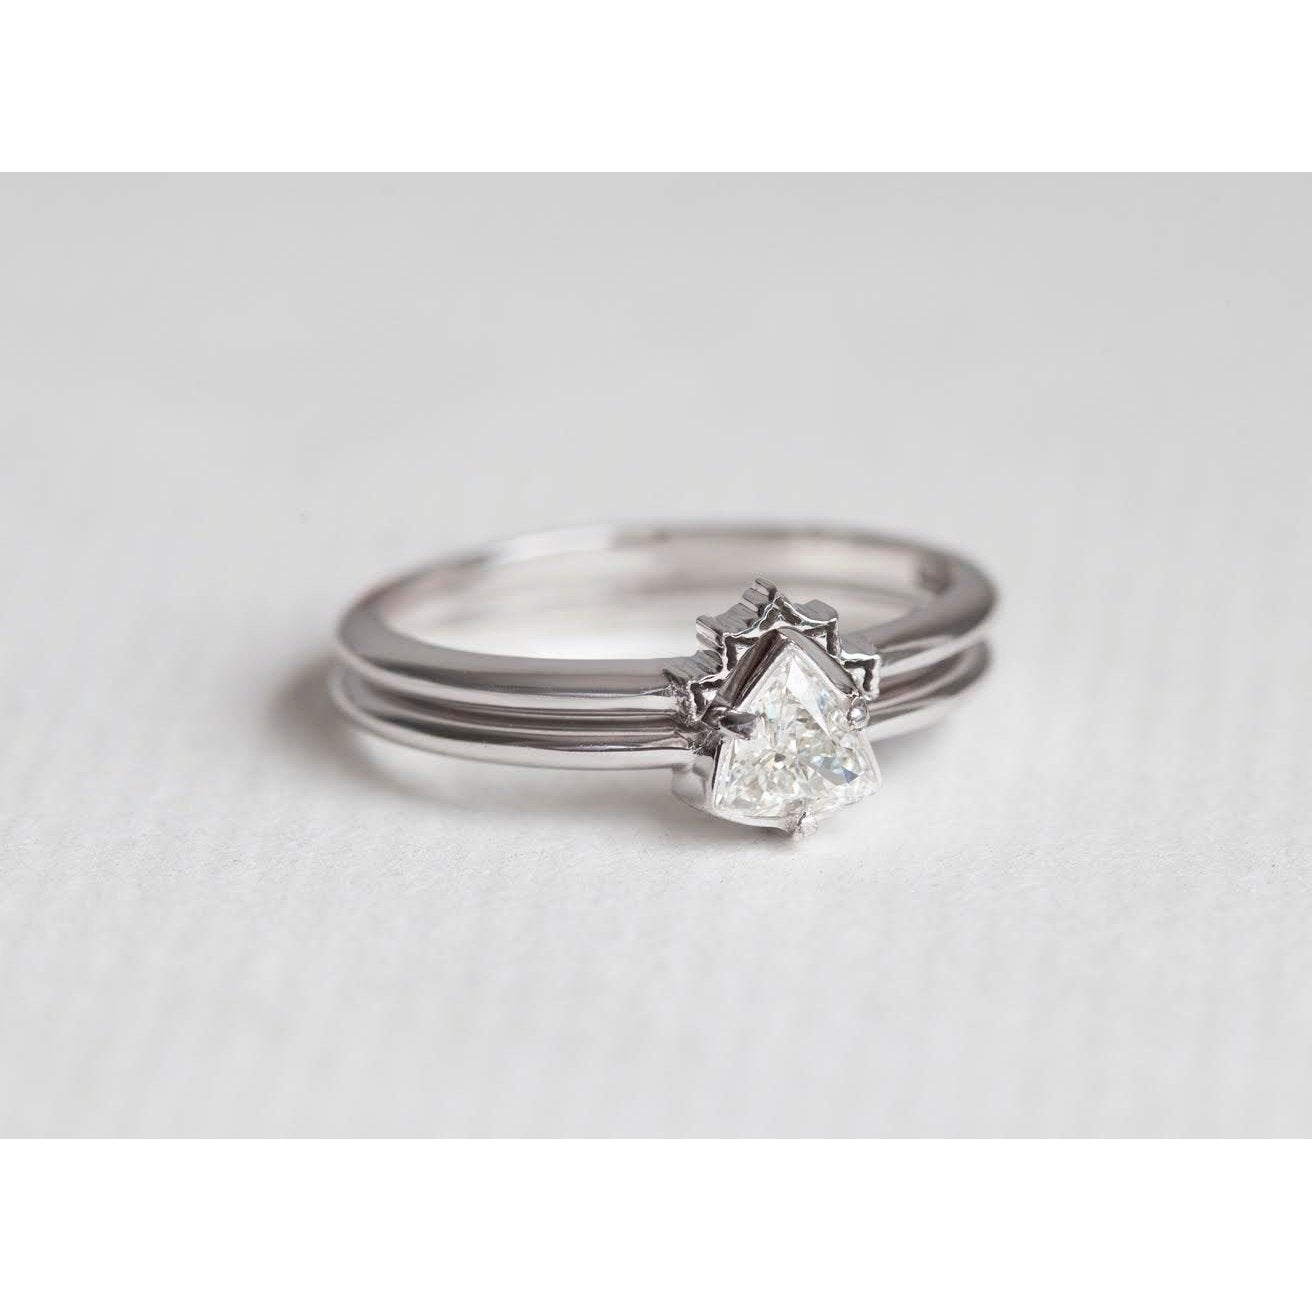 Trillion Cut White Diamond Engagement Ring set with lace band